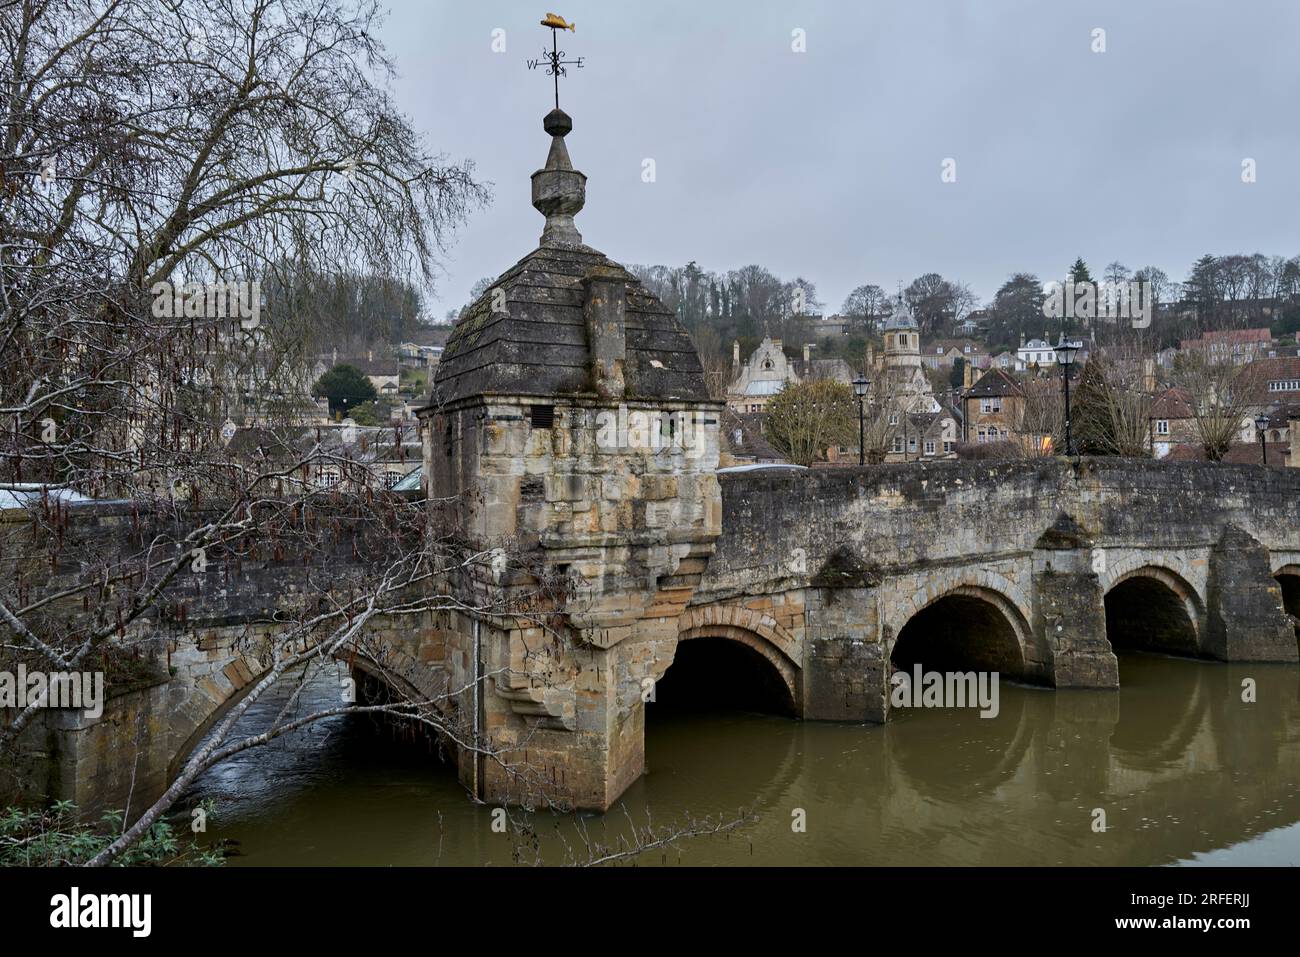 Town Bridge and Lock-up, Bradford-on-Avon, Wiltshire, England.The former chapel and then town lock up features a weathervane in the shape of a gudgeon. Stock Photo